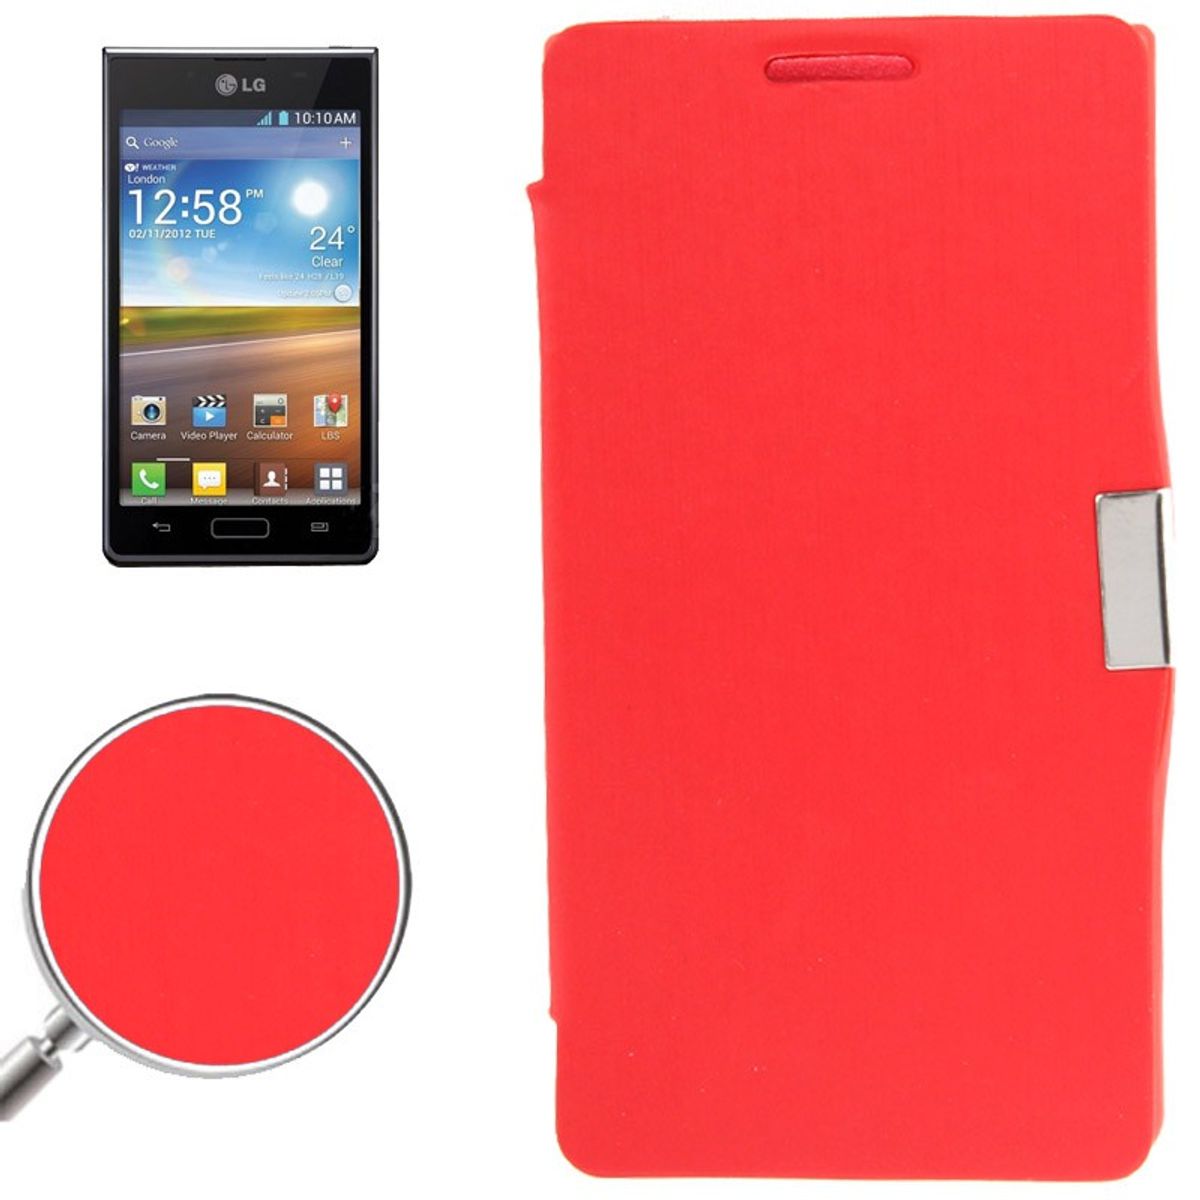 Mobile phone case for Lg Optimus L7 / P700 brushed red